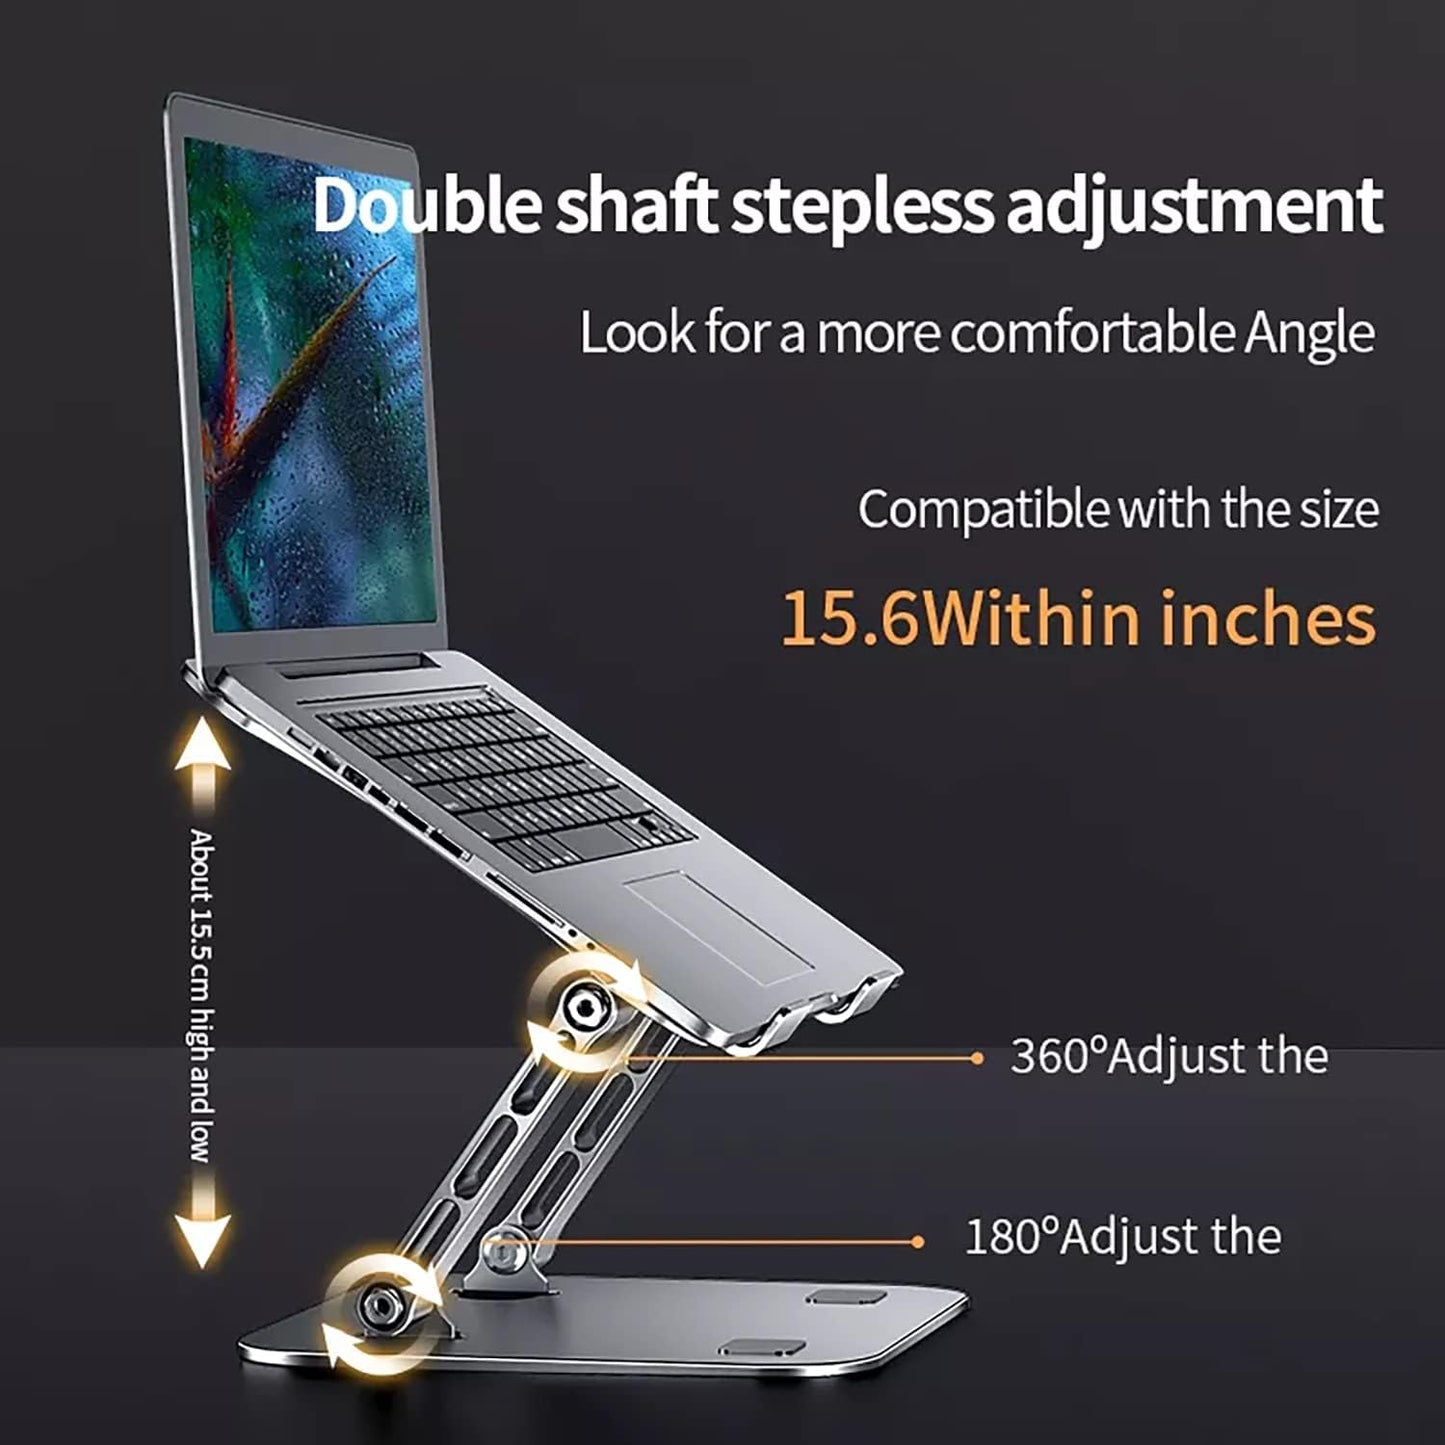 Laptop Stand, Laptop Holder, Multi-Angle Stand with Heat-Vent, Adjustable Notebook Stand for Laptops up to 17.3 inches, Compatible for MacBook Pro/Air, Surface Laptop(Grey)